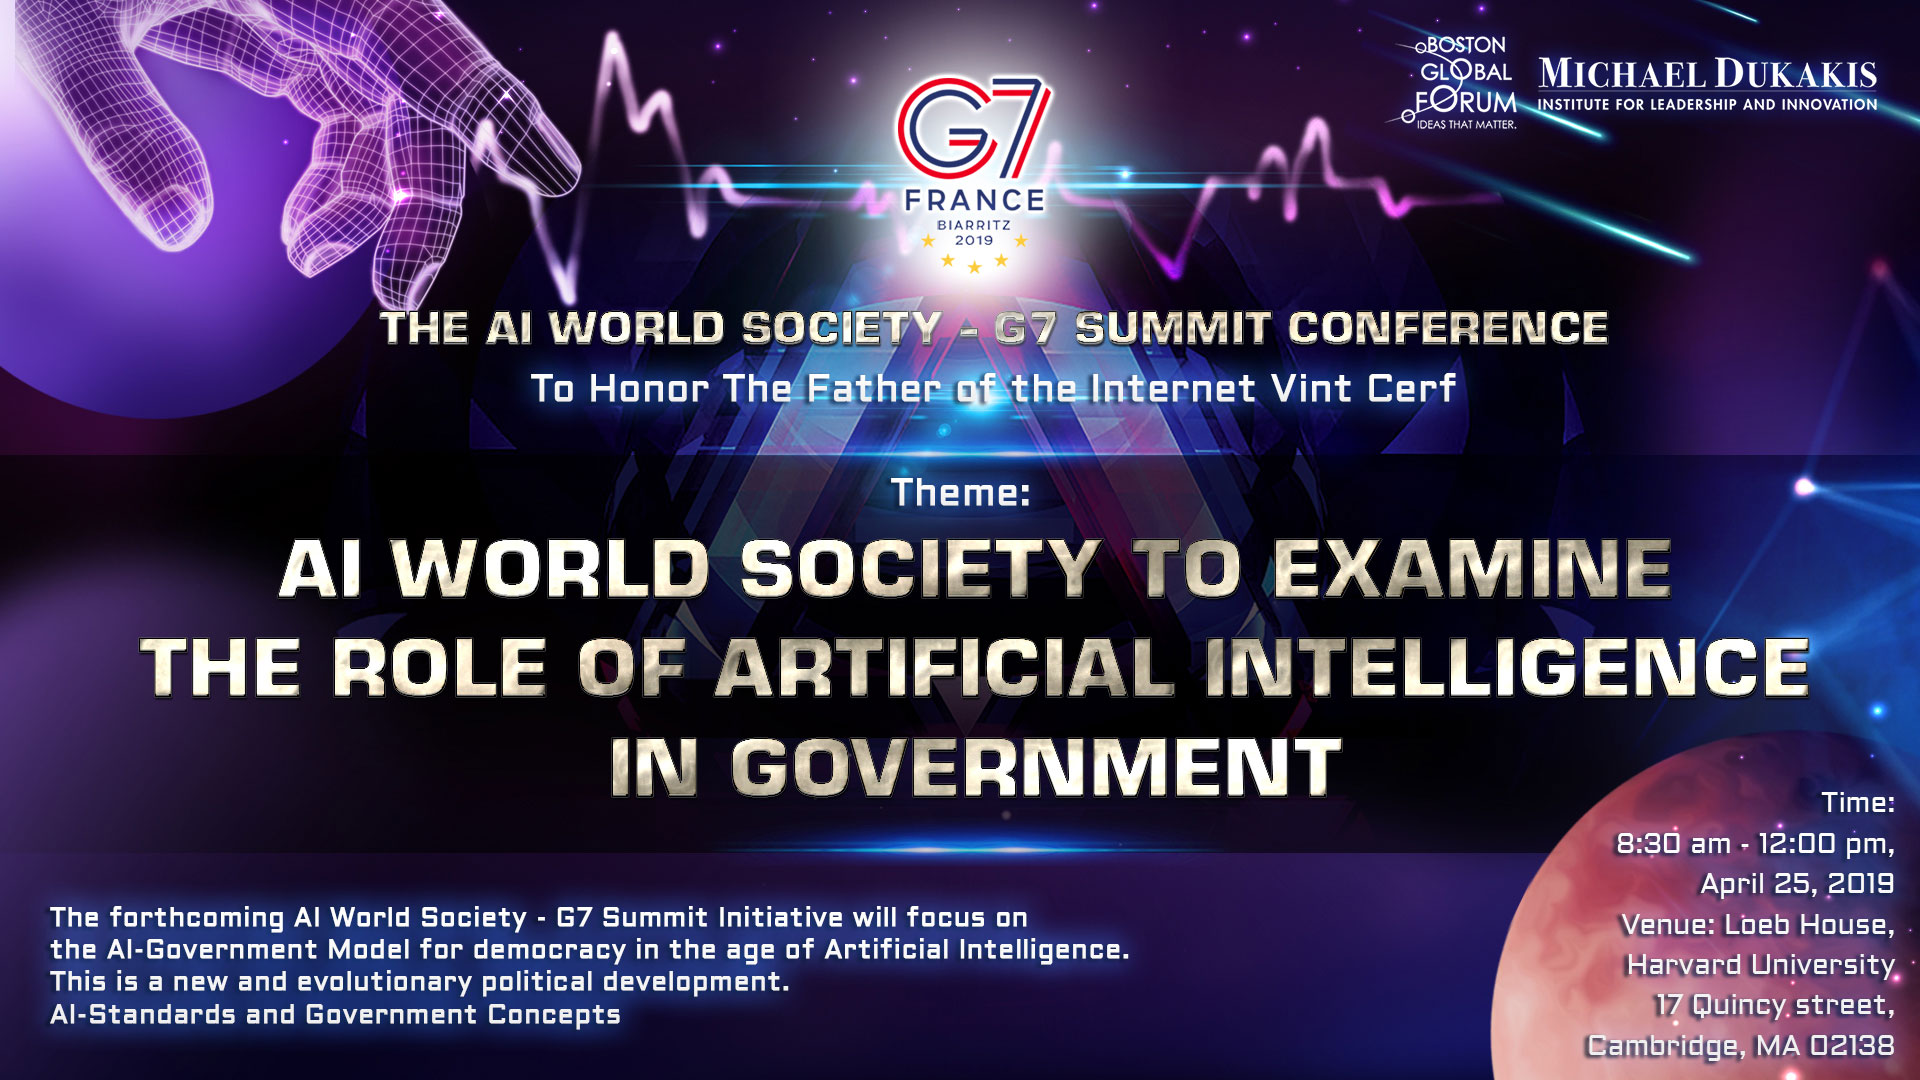 To Honor The Fathers of The Internet Vinton Cerf at AI World Society – G7 Summit Conference